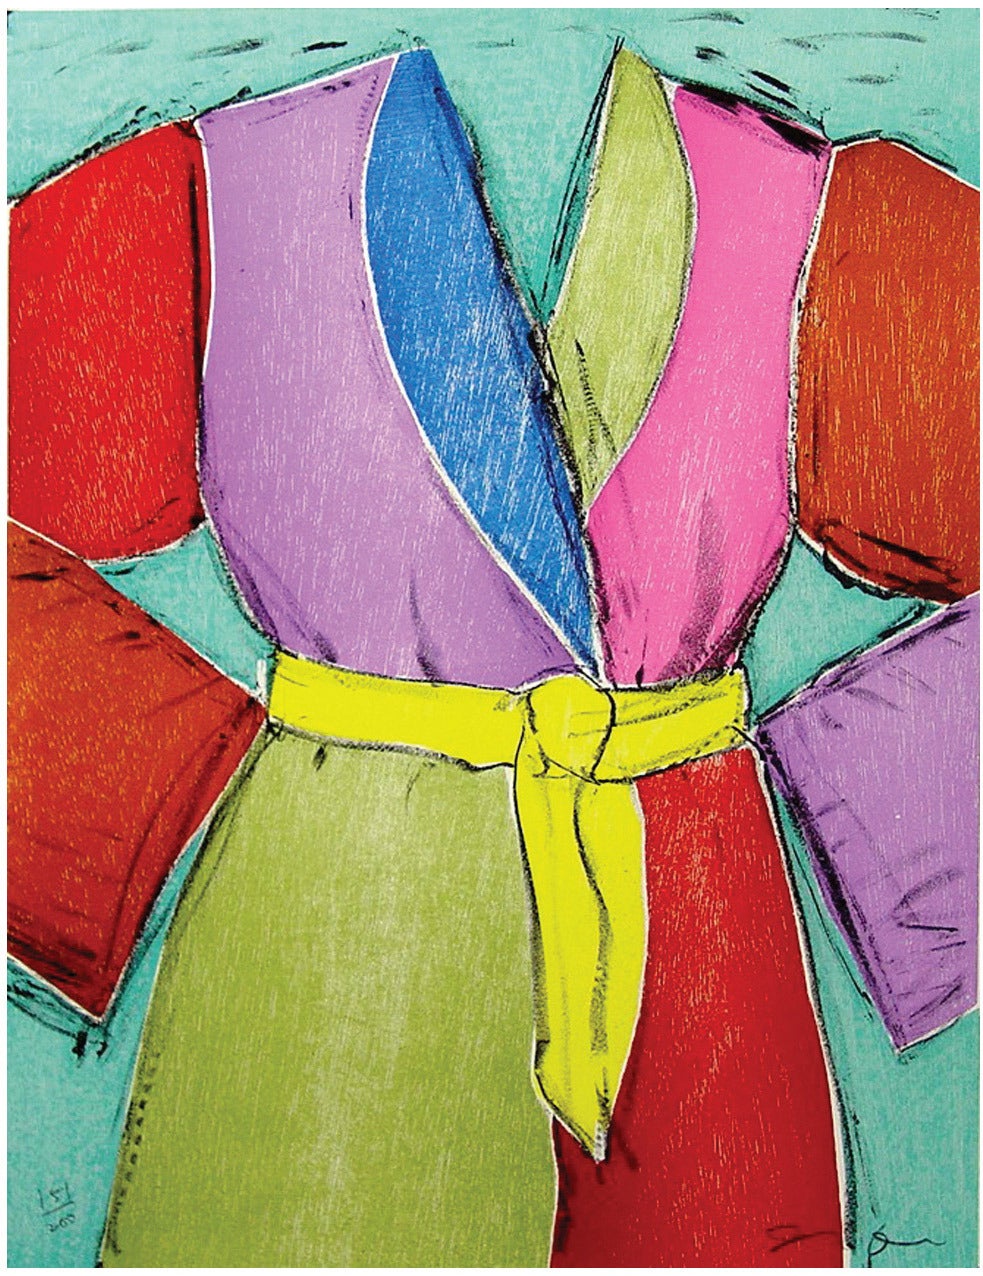 The Yellow Belt - Print by Jim Dine